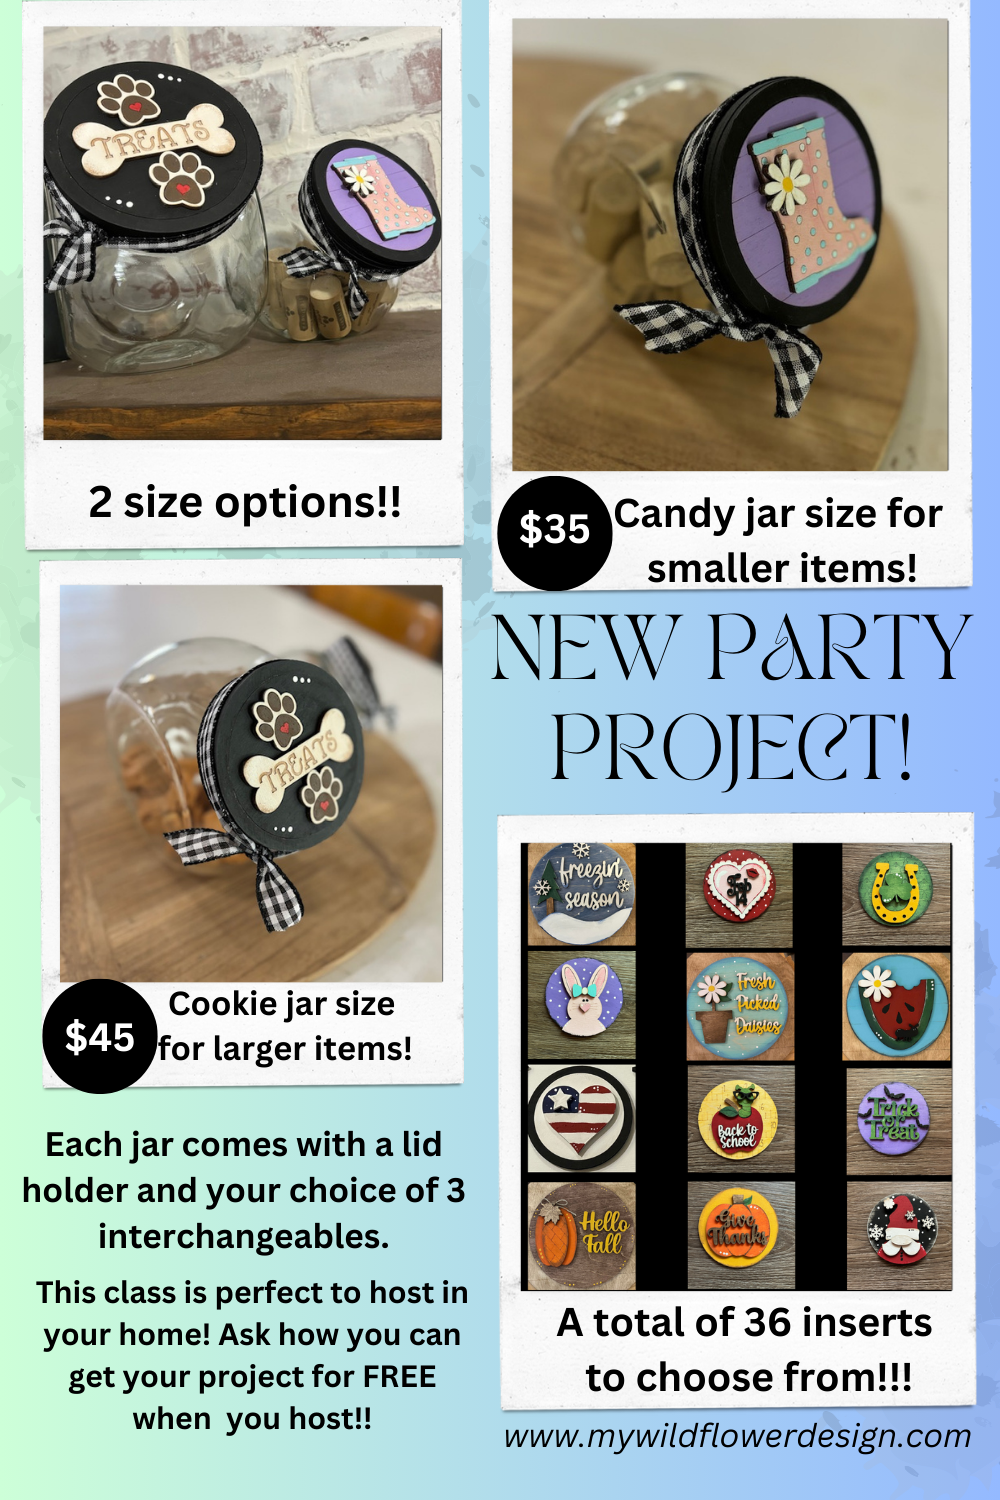 Let's Get Crafty -New Project- Interchangeable Cookie and Candy jars